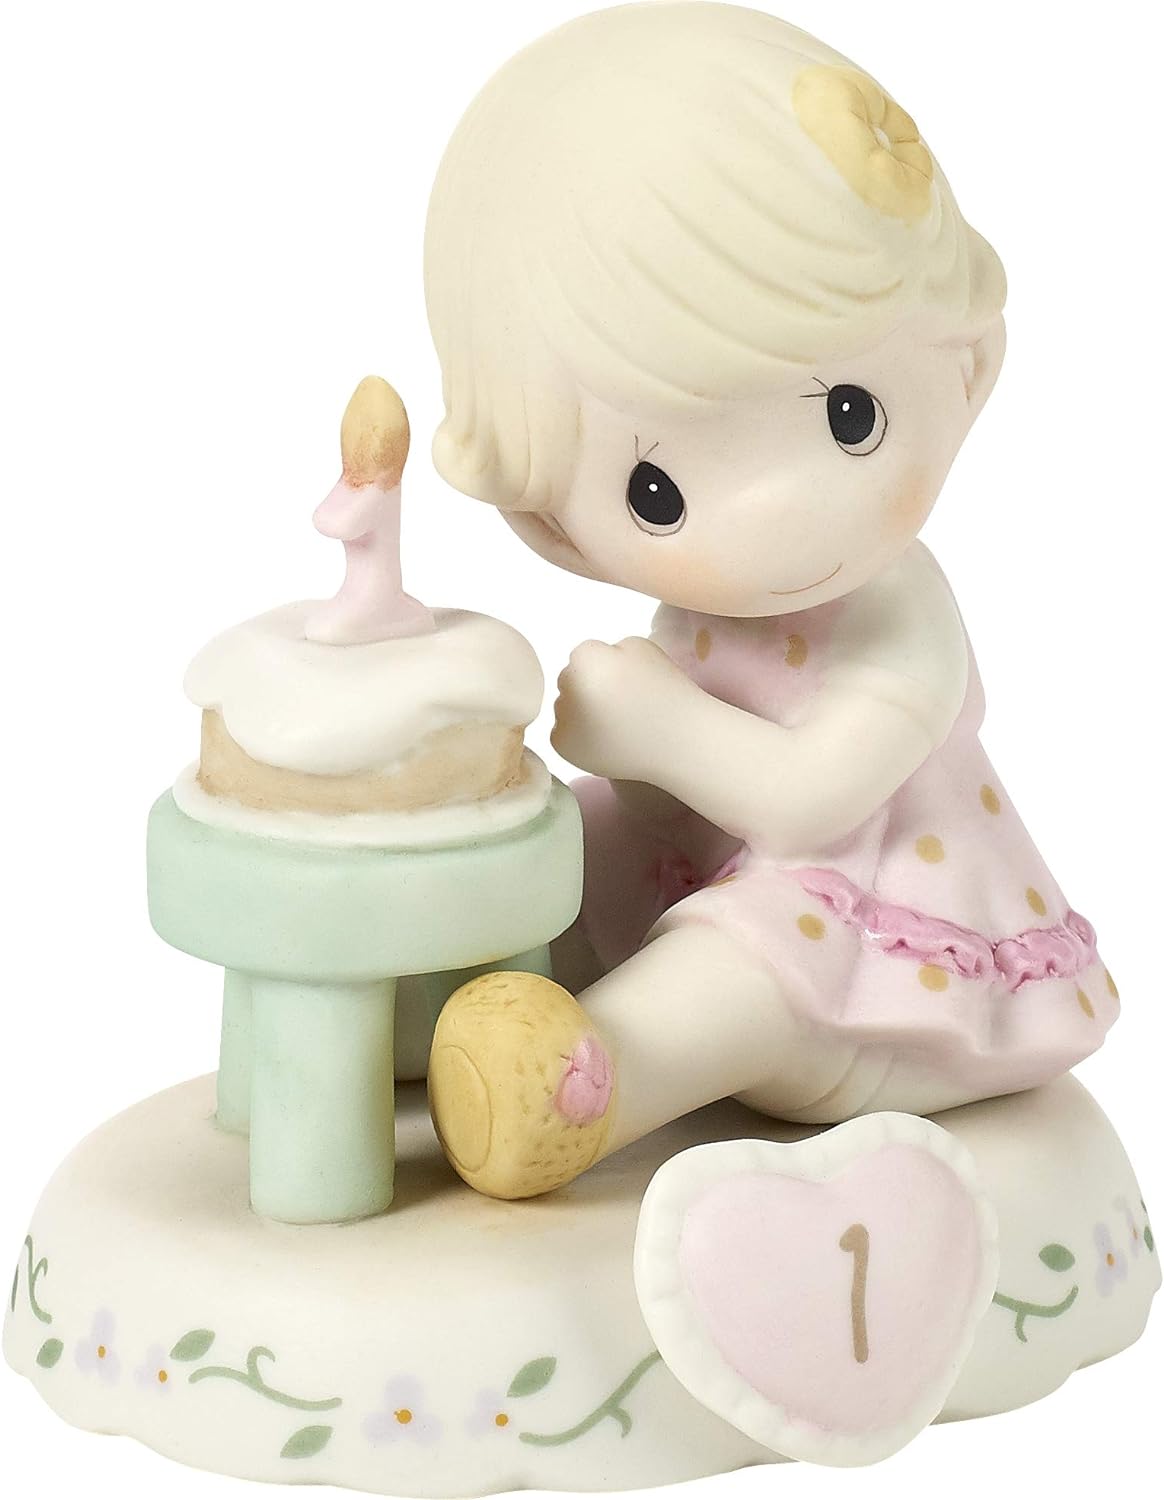 Precious Moments Age 1 Girl Birthday Gifts, Growing in Grace, Porcelain Figurine